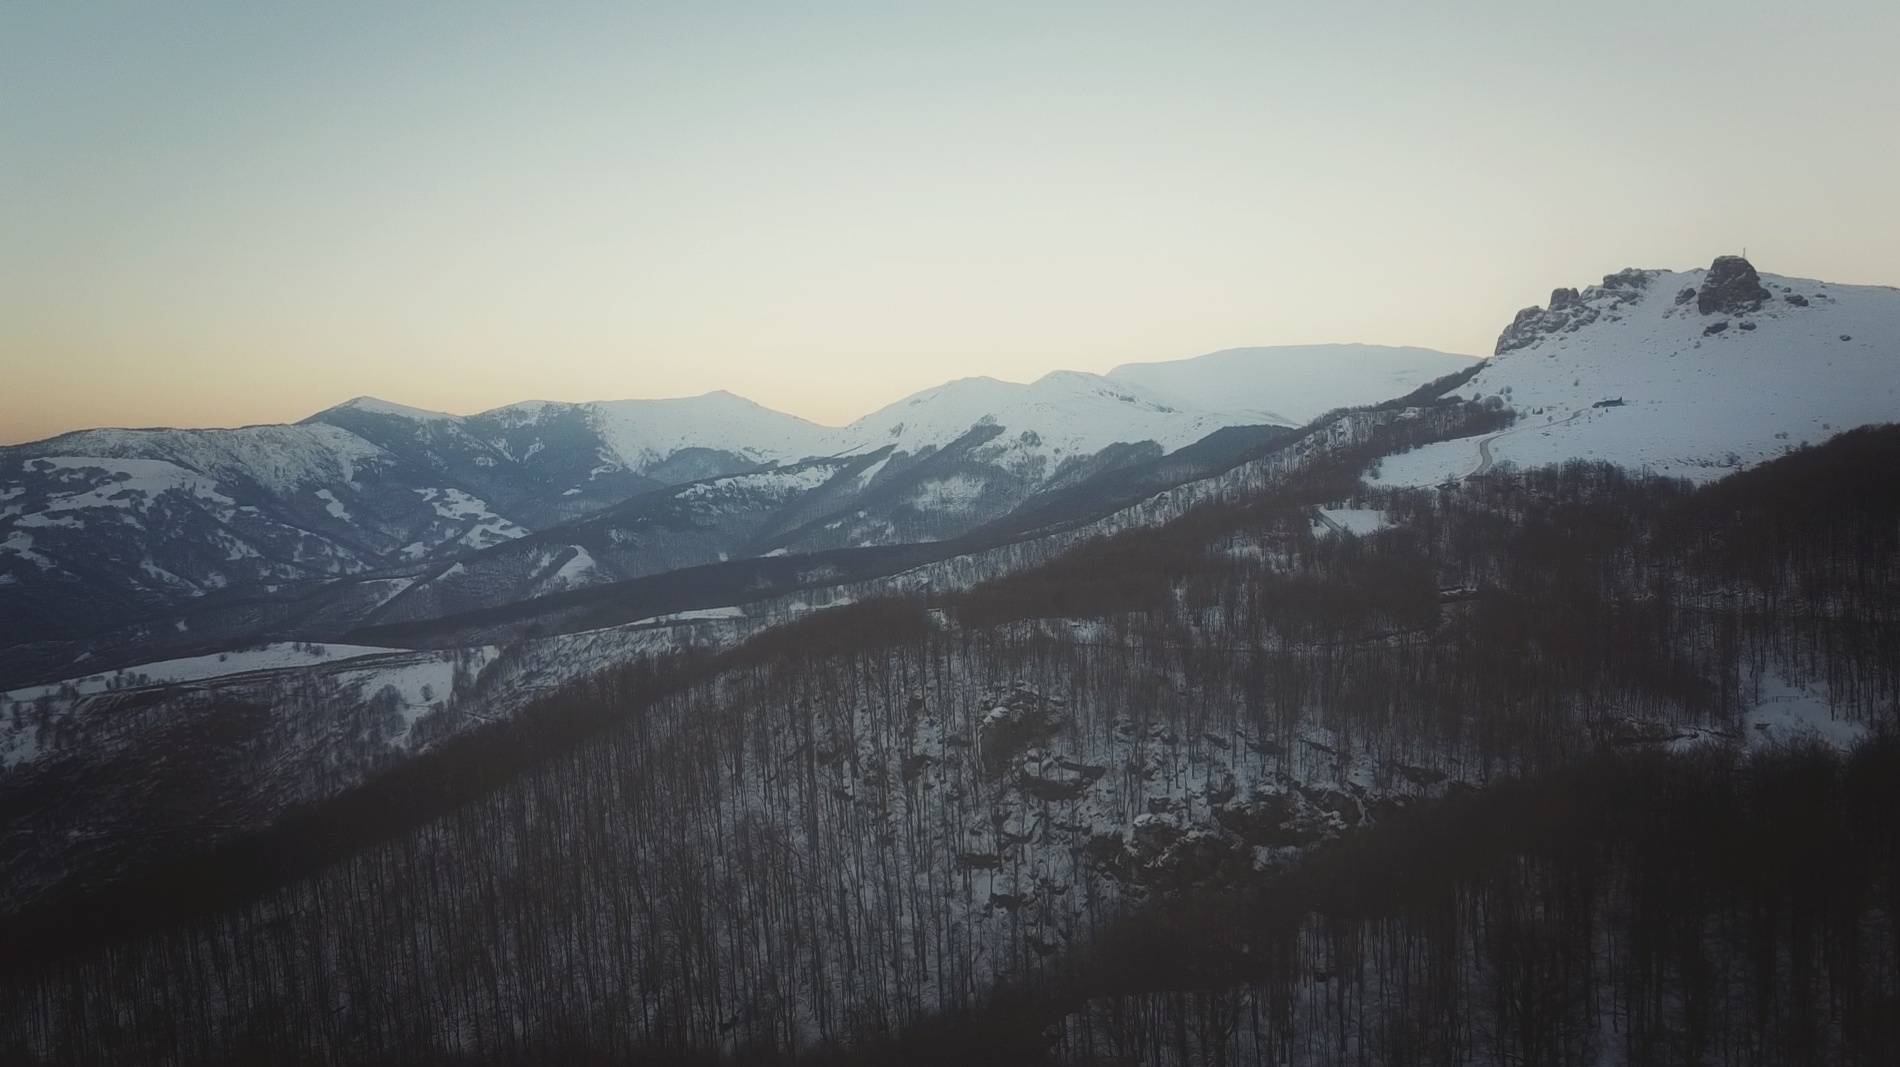 Snowboarding in forgotten Serbian resort. Spoiler: It was awesome! Photo & video report...